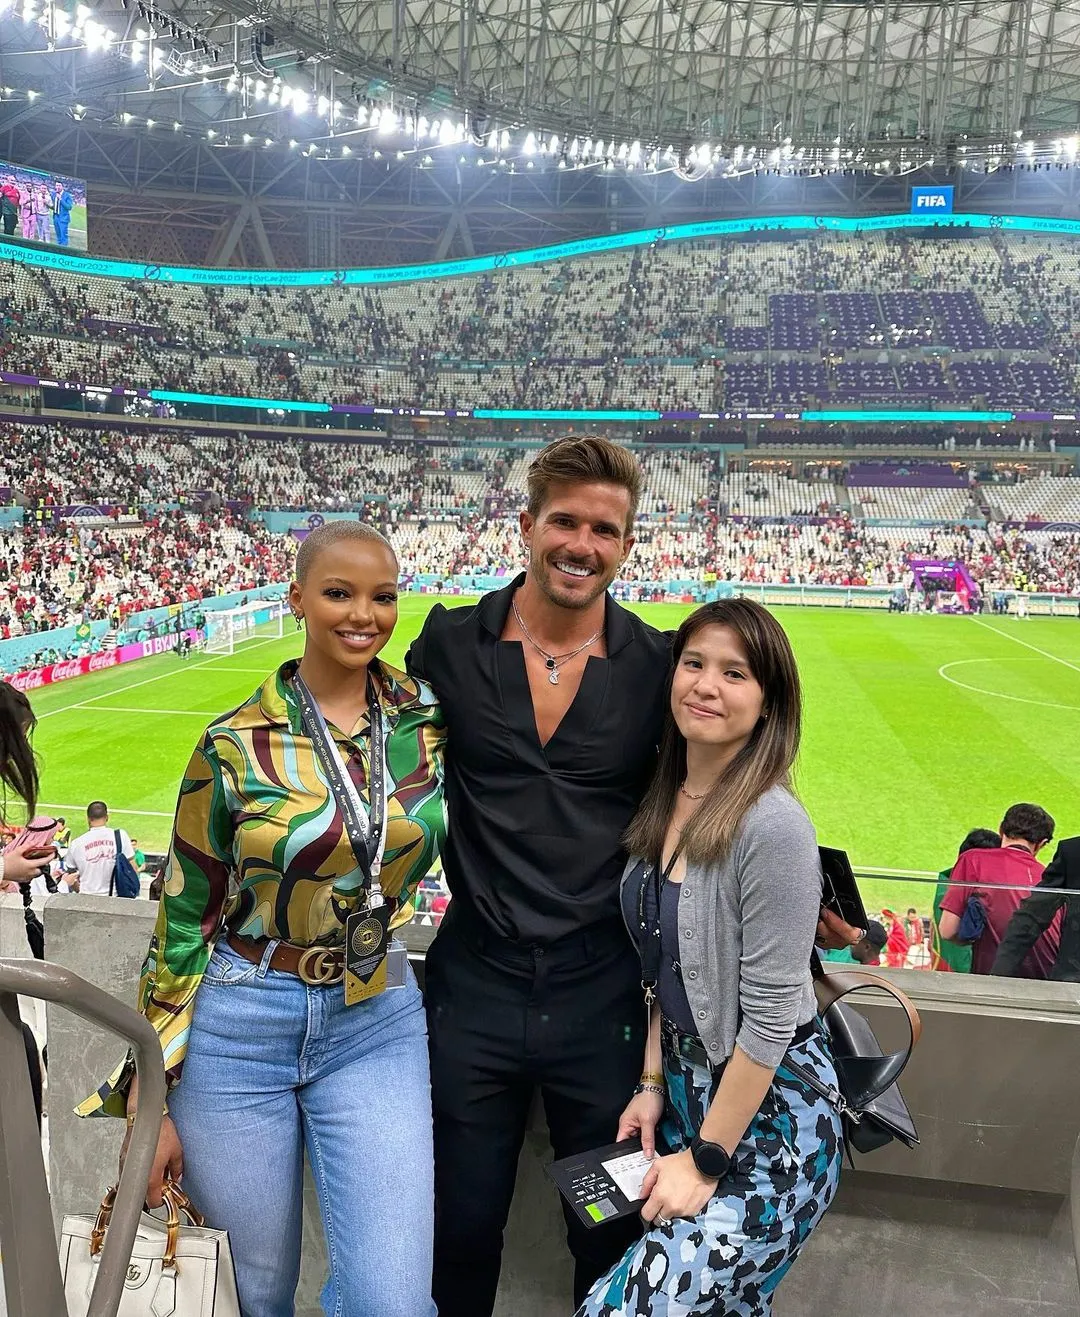 Mihlali Ndamase shares some moments at the #FIFAWorldCup game in Qatar